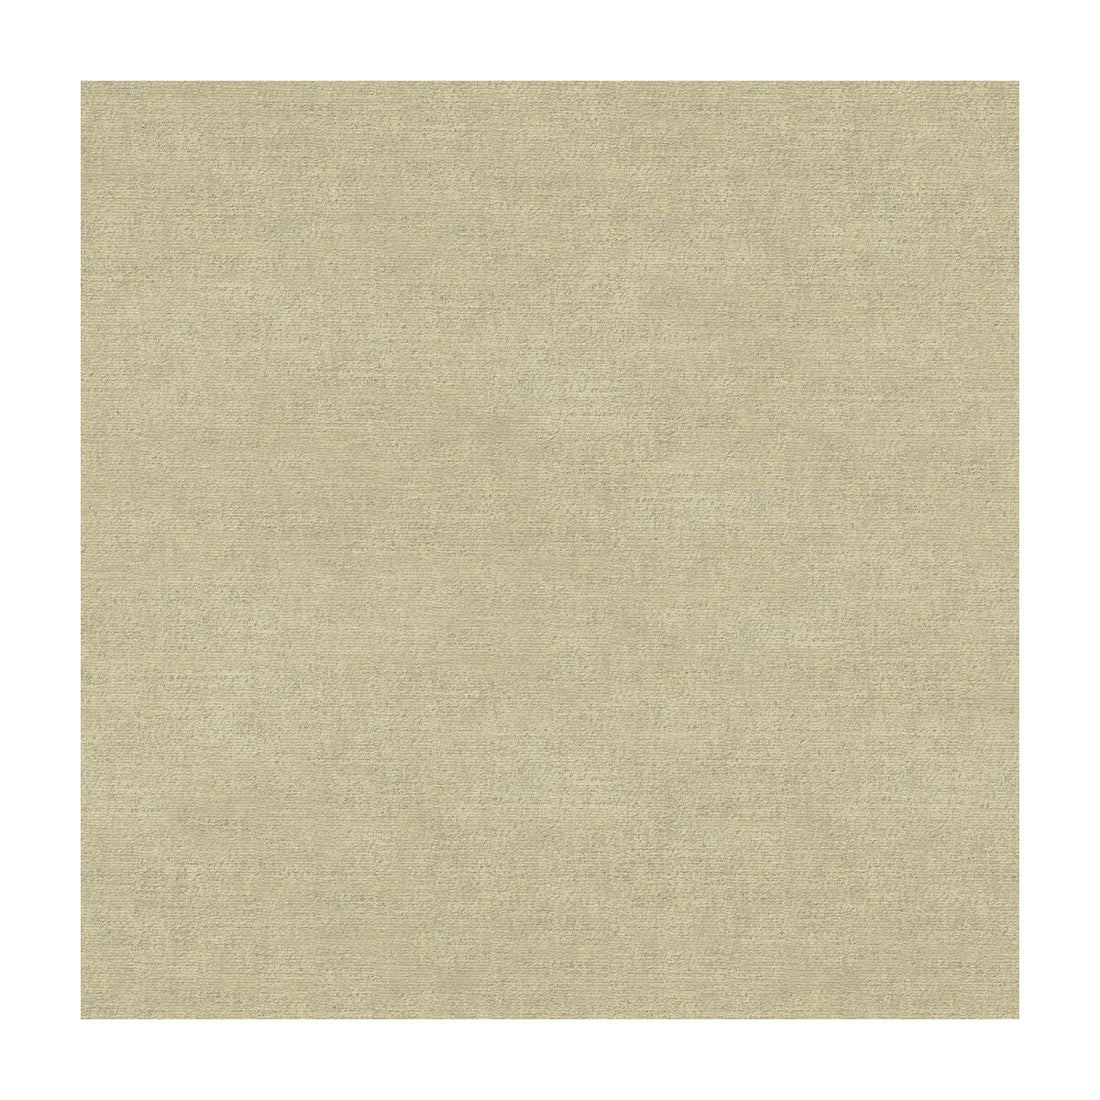 Montage fabric in beige color - pattern GWF-3526.16.0 - by Lee Jofa Modern in the Kelly Wearstler III collection